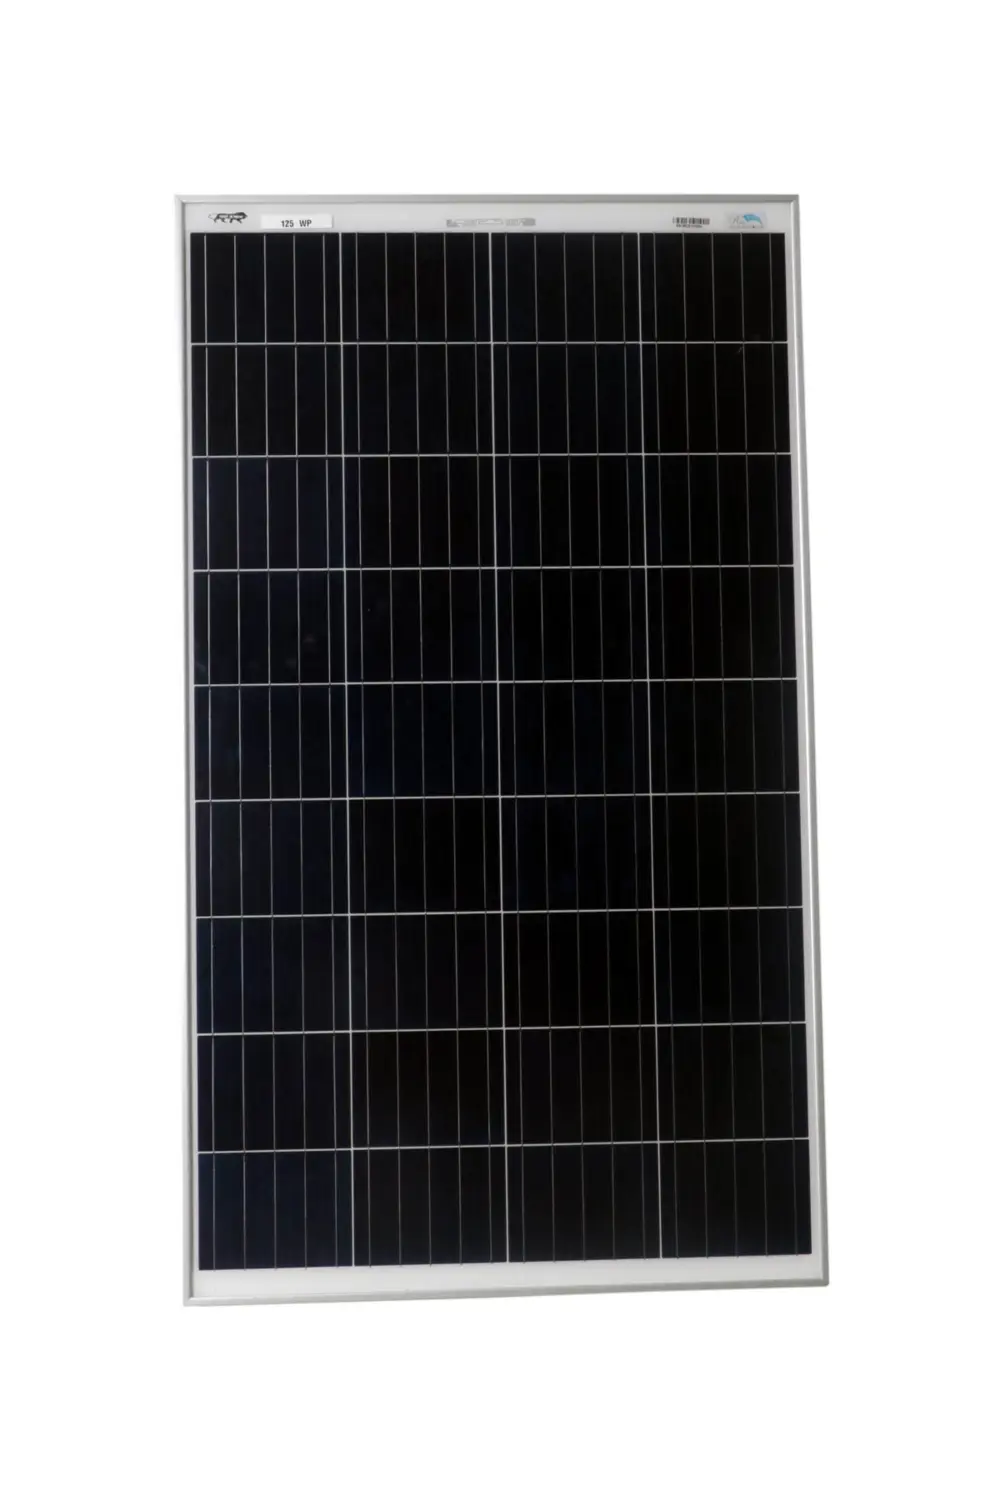 125 watt solar panel price in india - What is the price of 130 watt solar panel in India